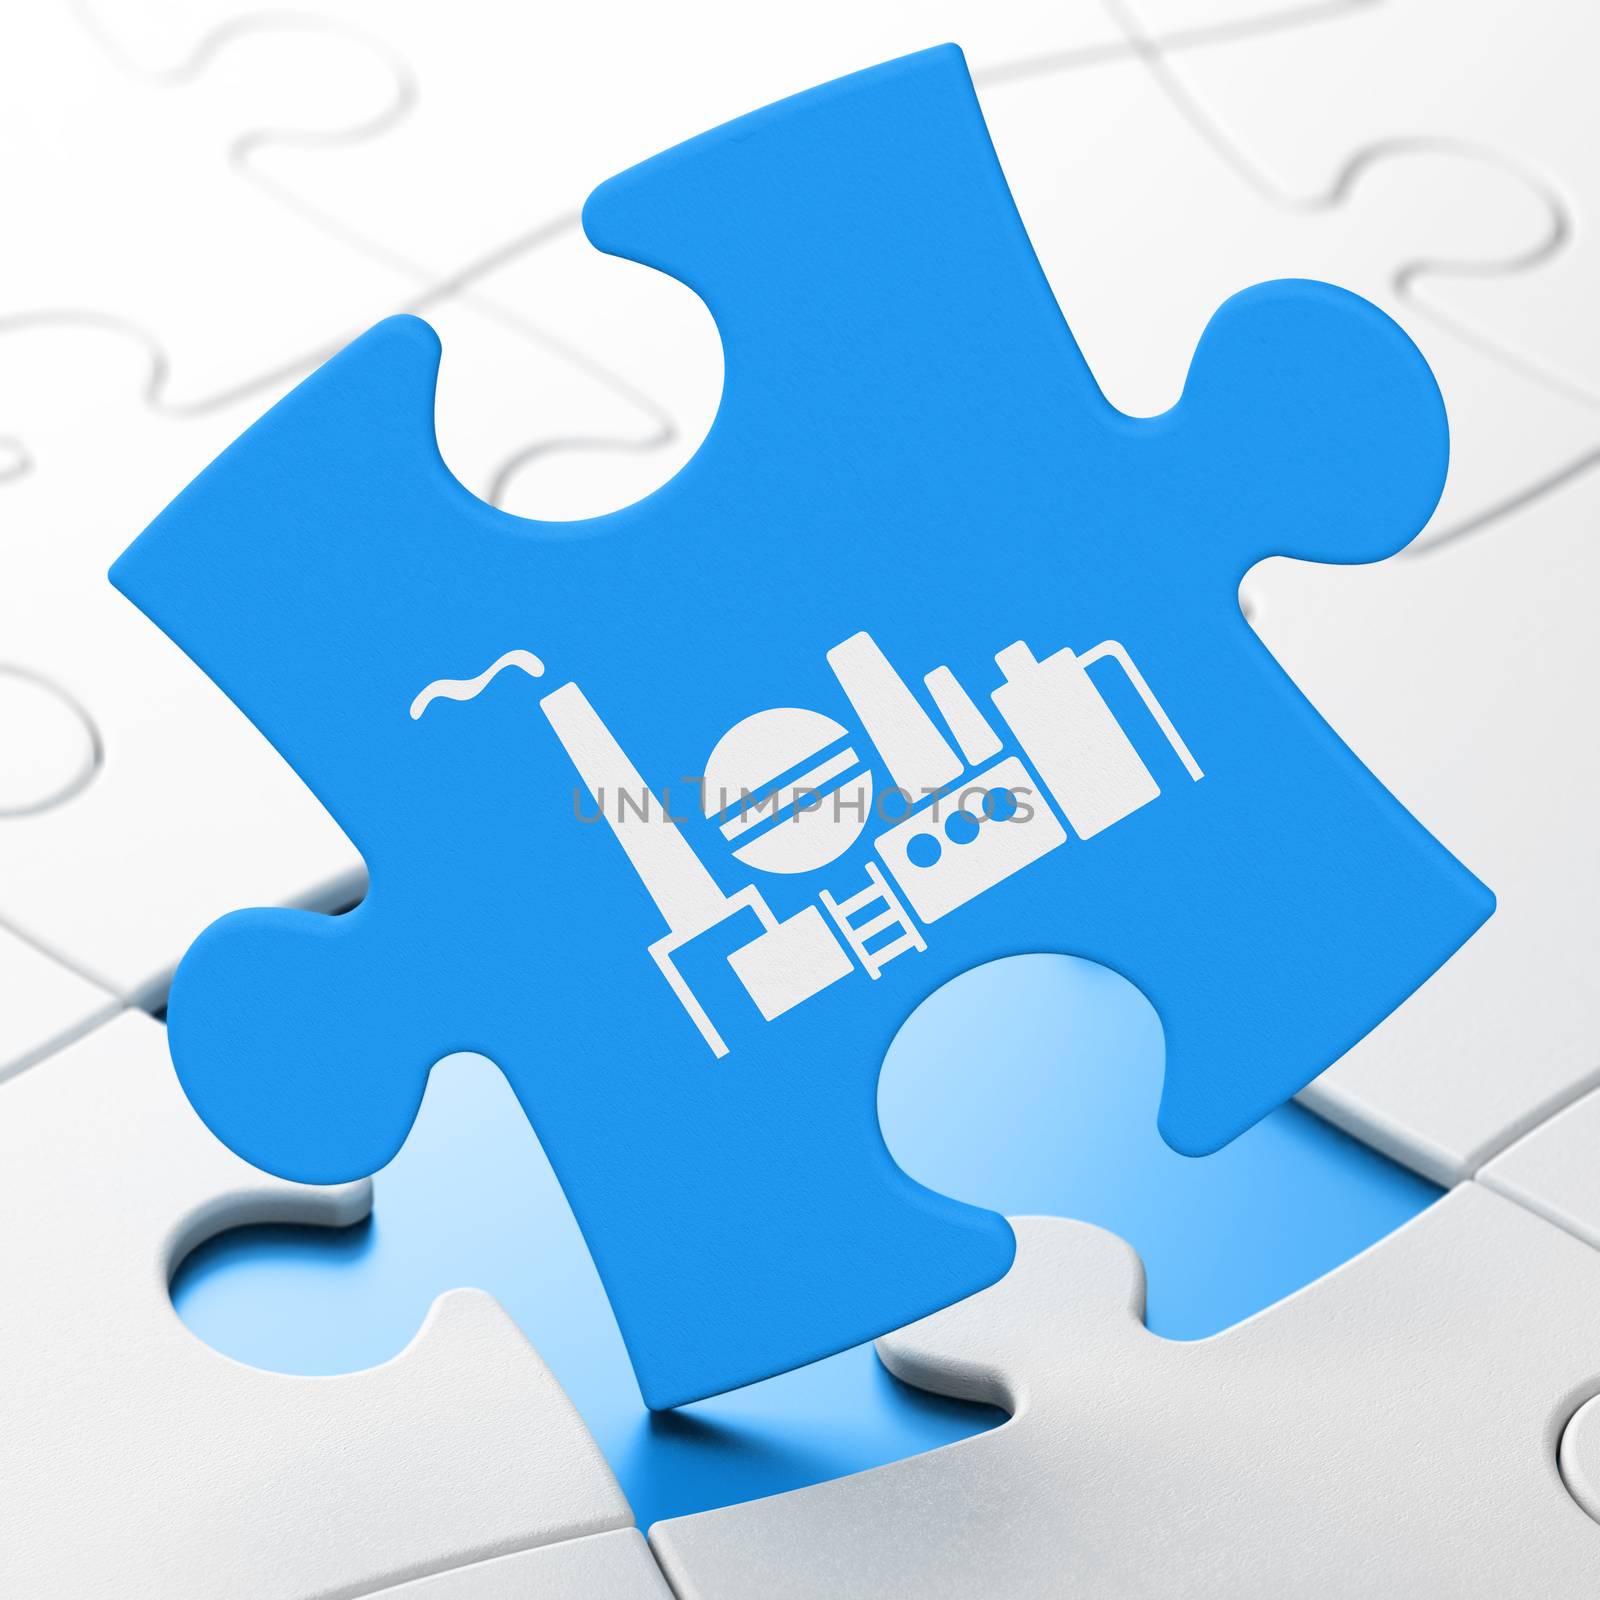 Finance concept: Oil And Gas Indusry on Blue puzzle pieces background, 3D rendering